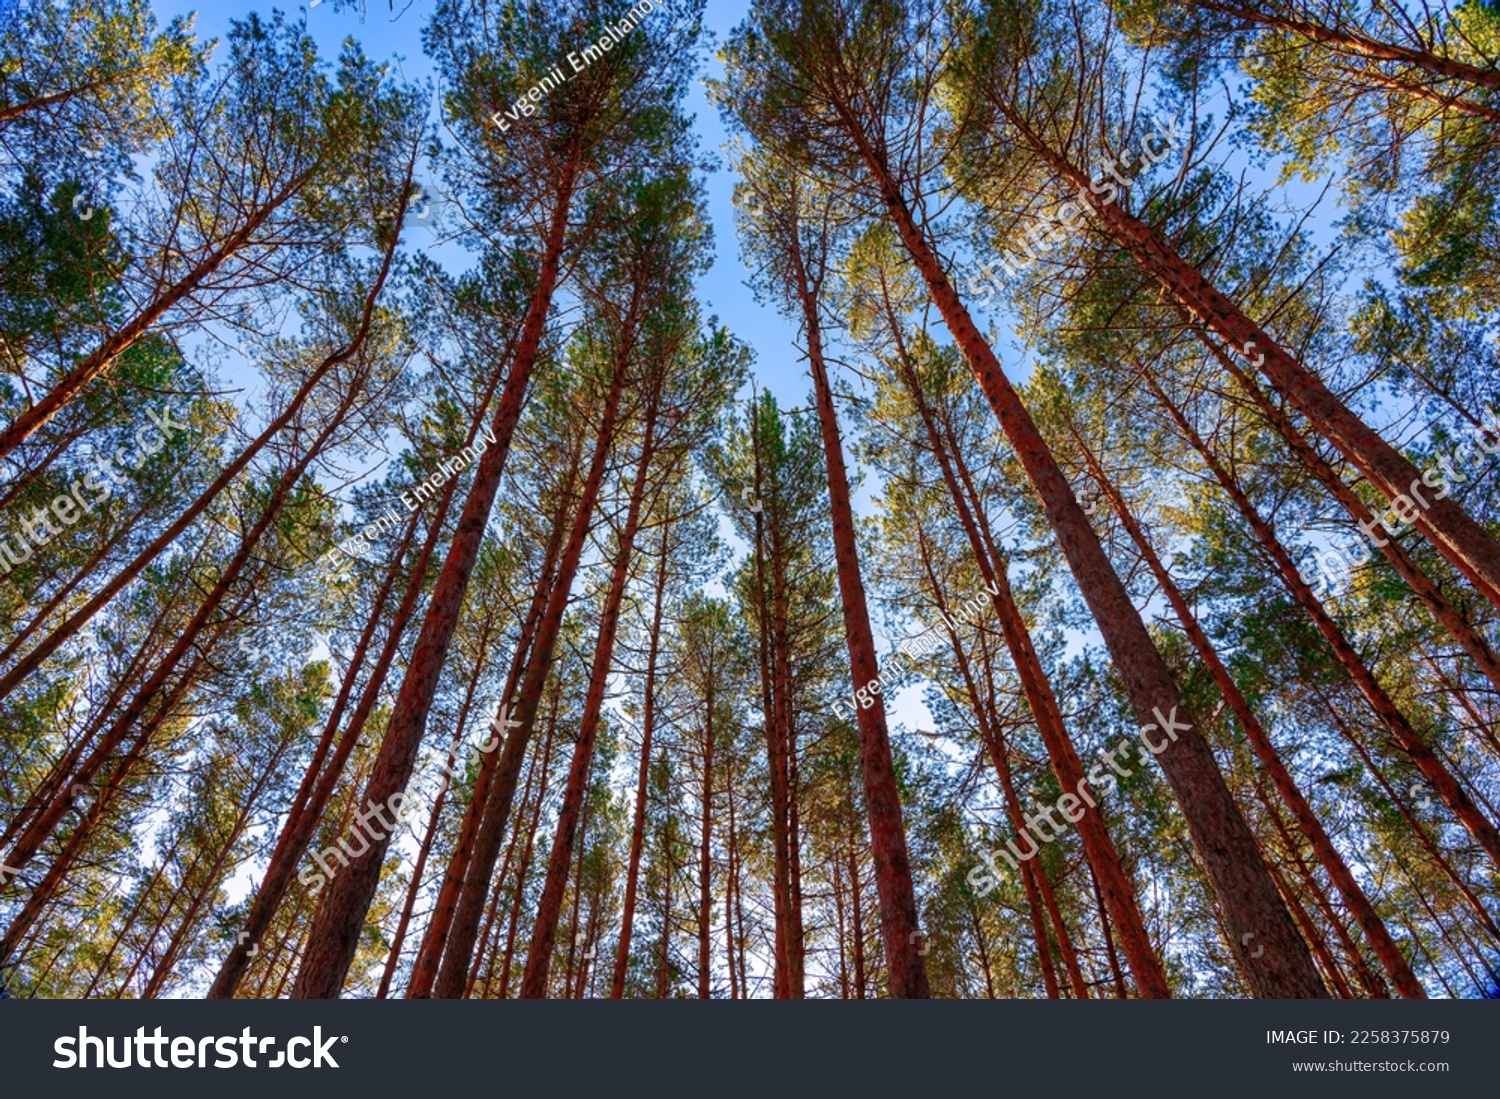 Bottom view of the trunks of pine trees against a clear sky. #2258375879